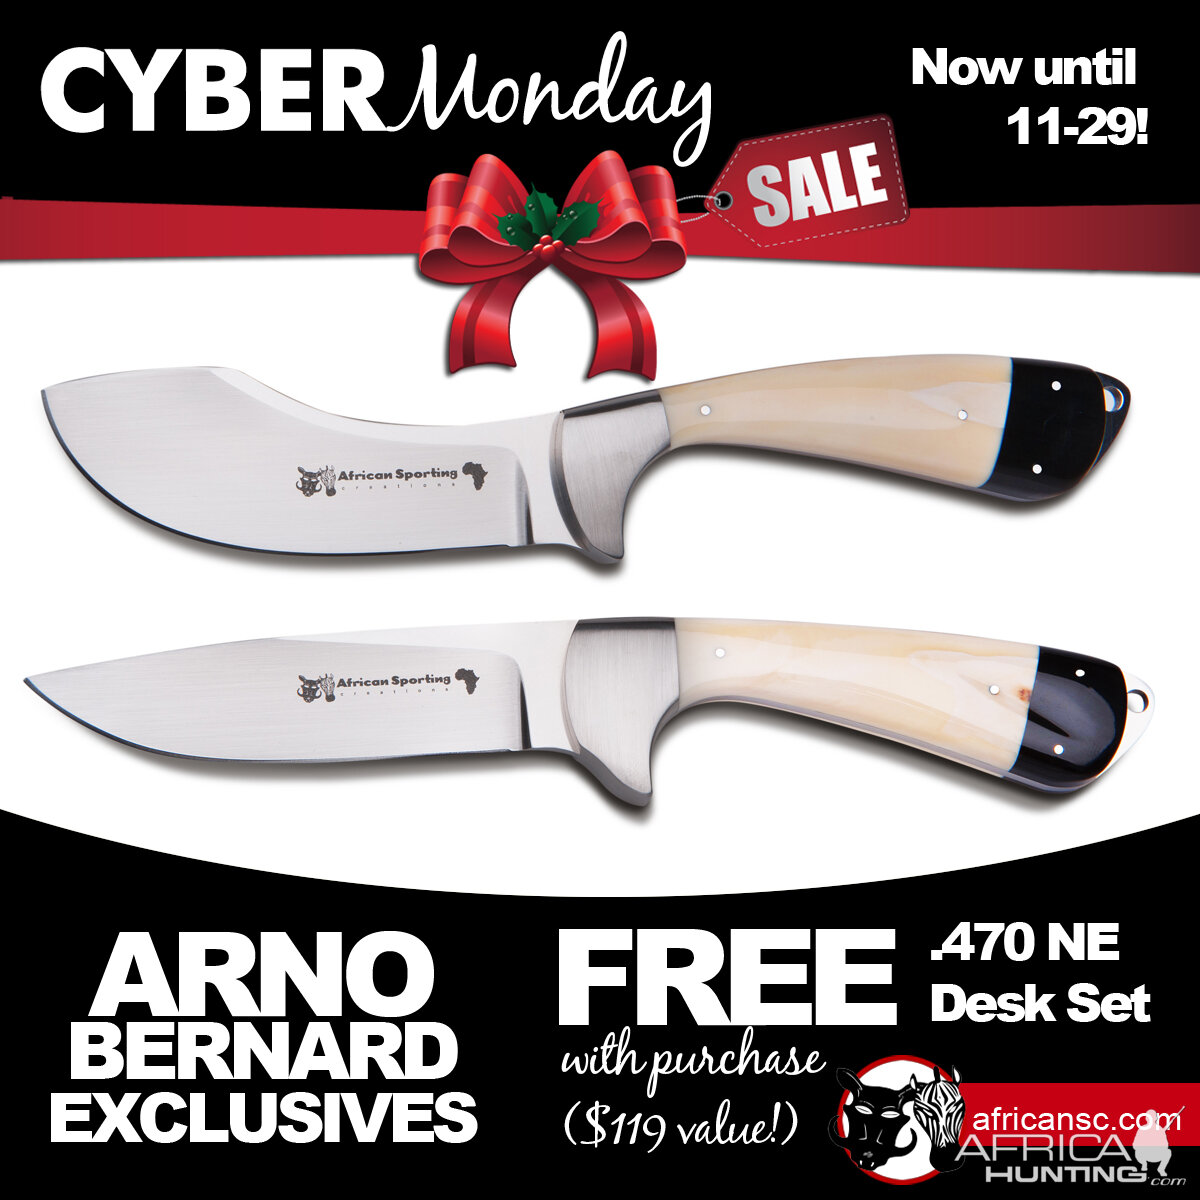 Arno Bernard Knives - special for Cyber Monday